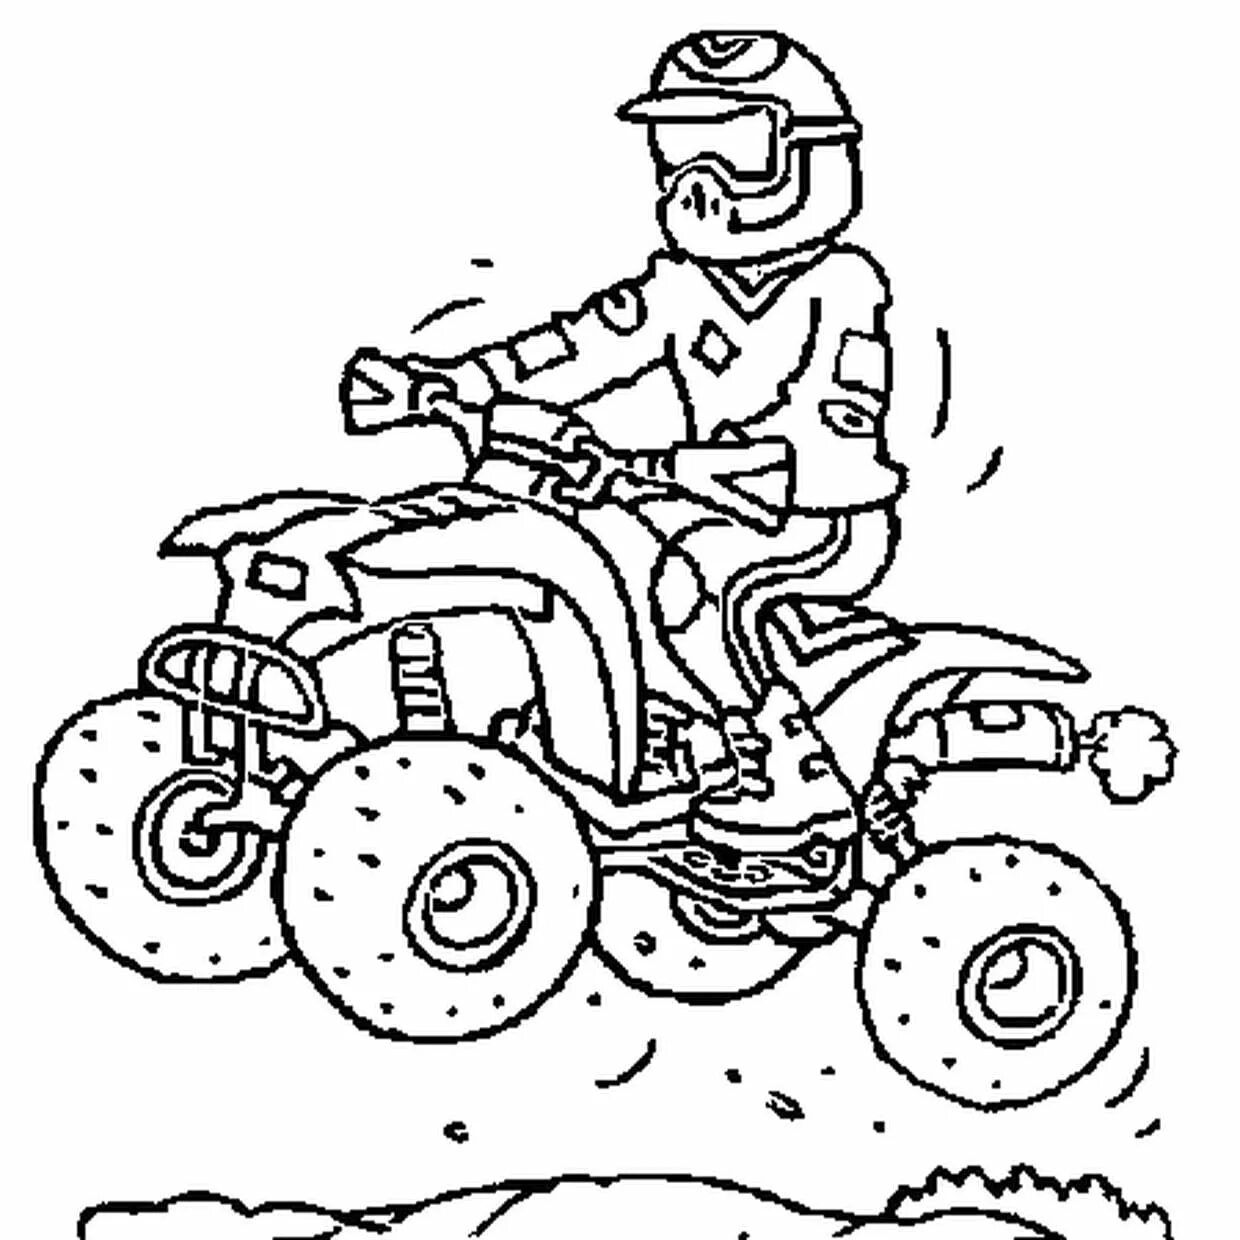 Exciting coloring book for kids on quad bikes